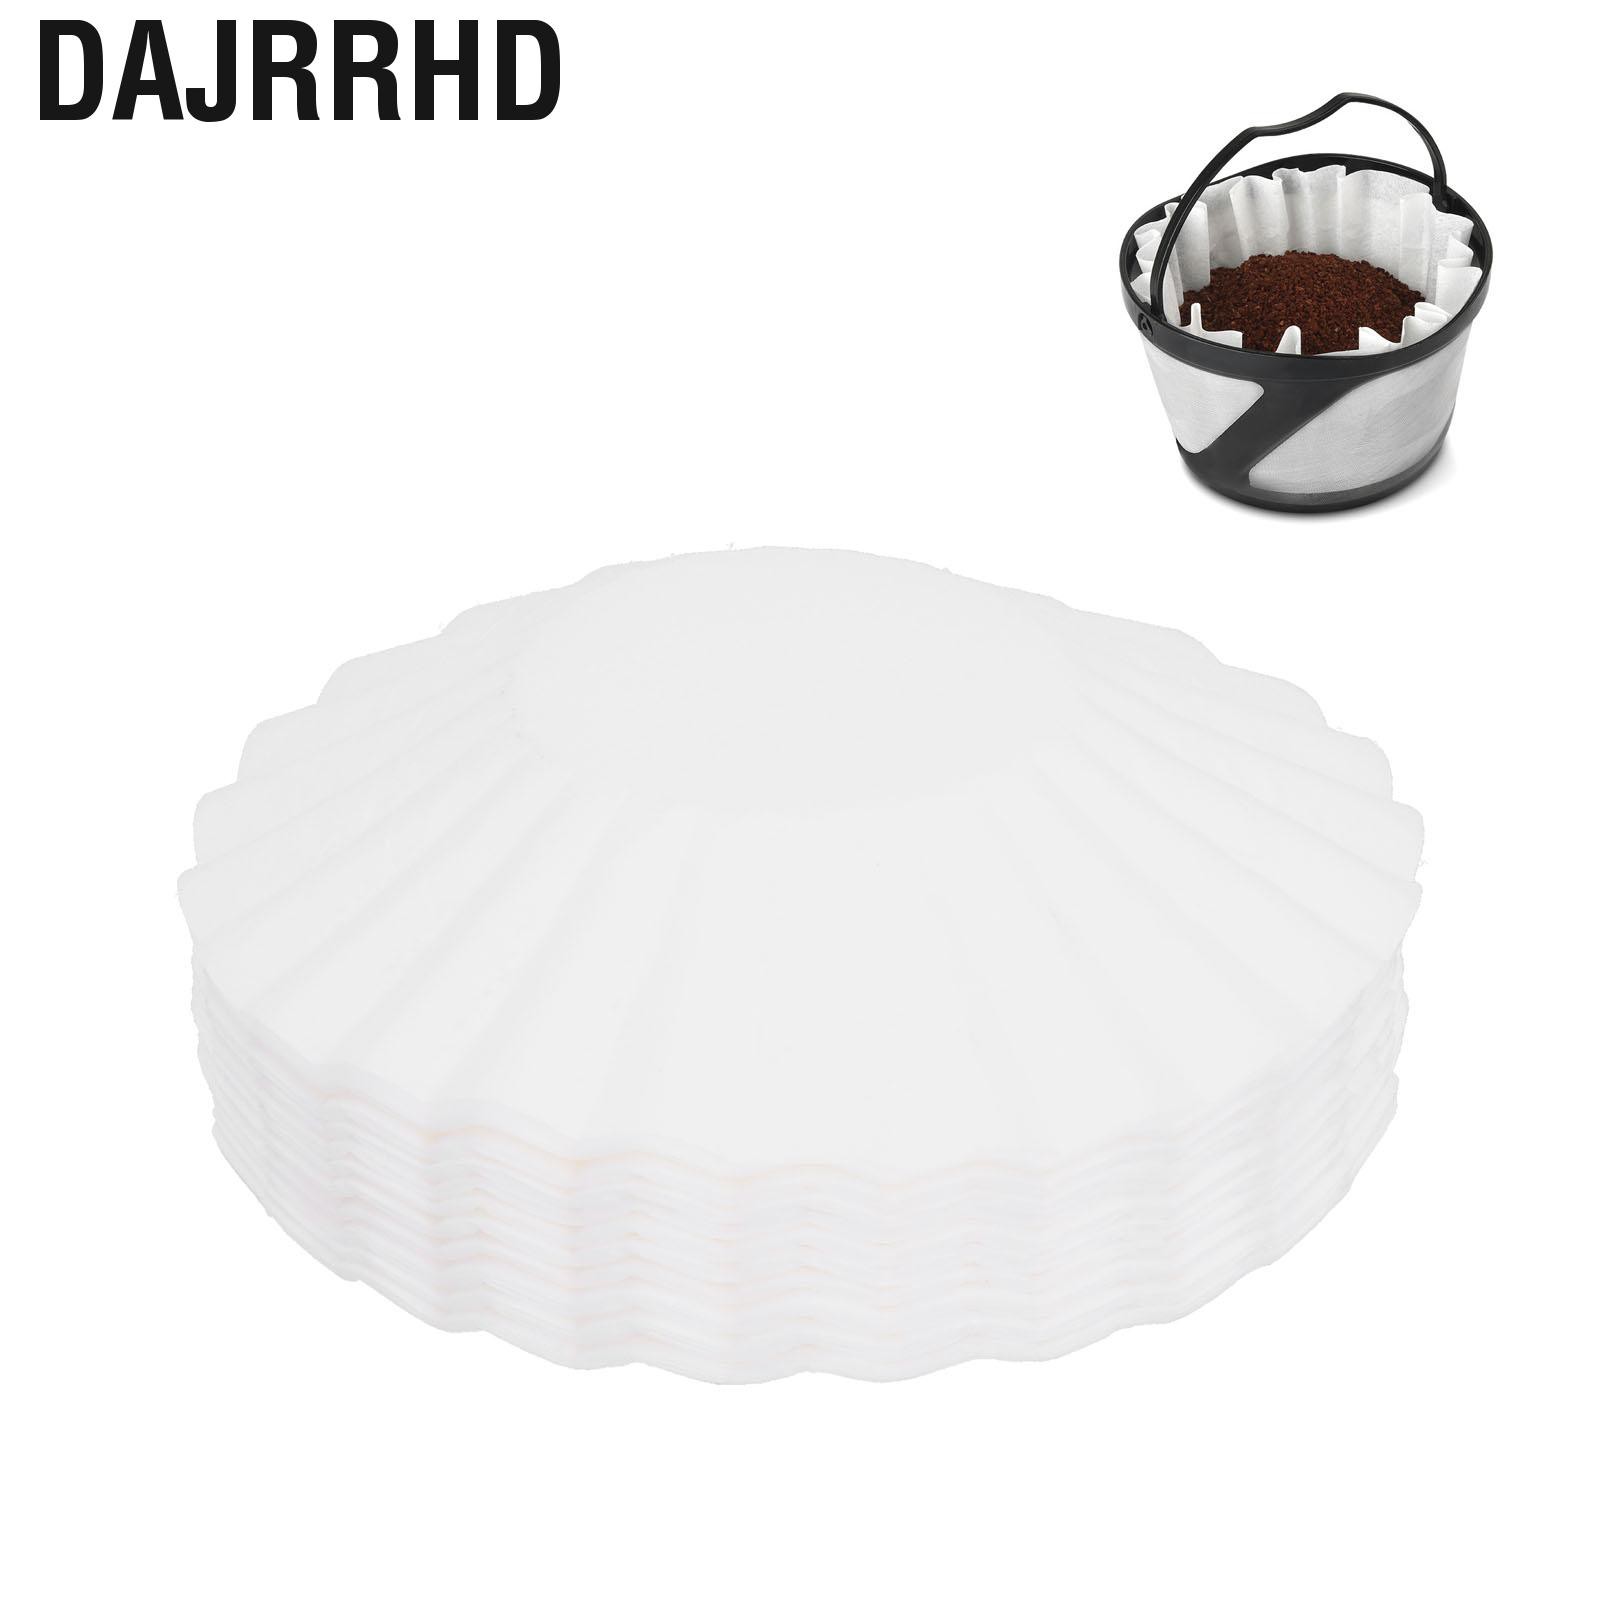 Dajrrhd 100PCS Coffee Filter Papers Pour Over Paper Cup Fit for KEURIG K-DUO ESSENTIALS